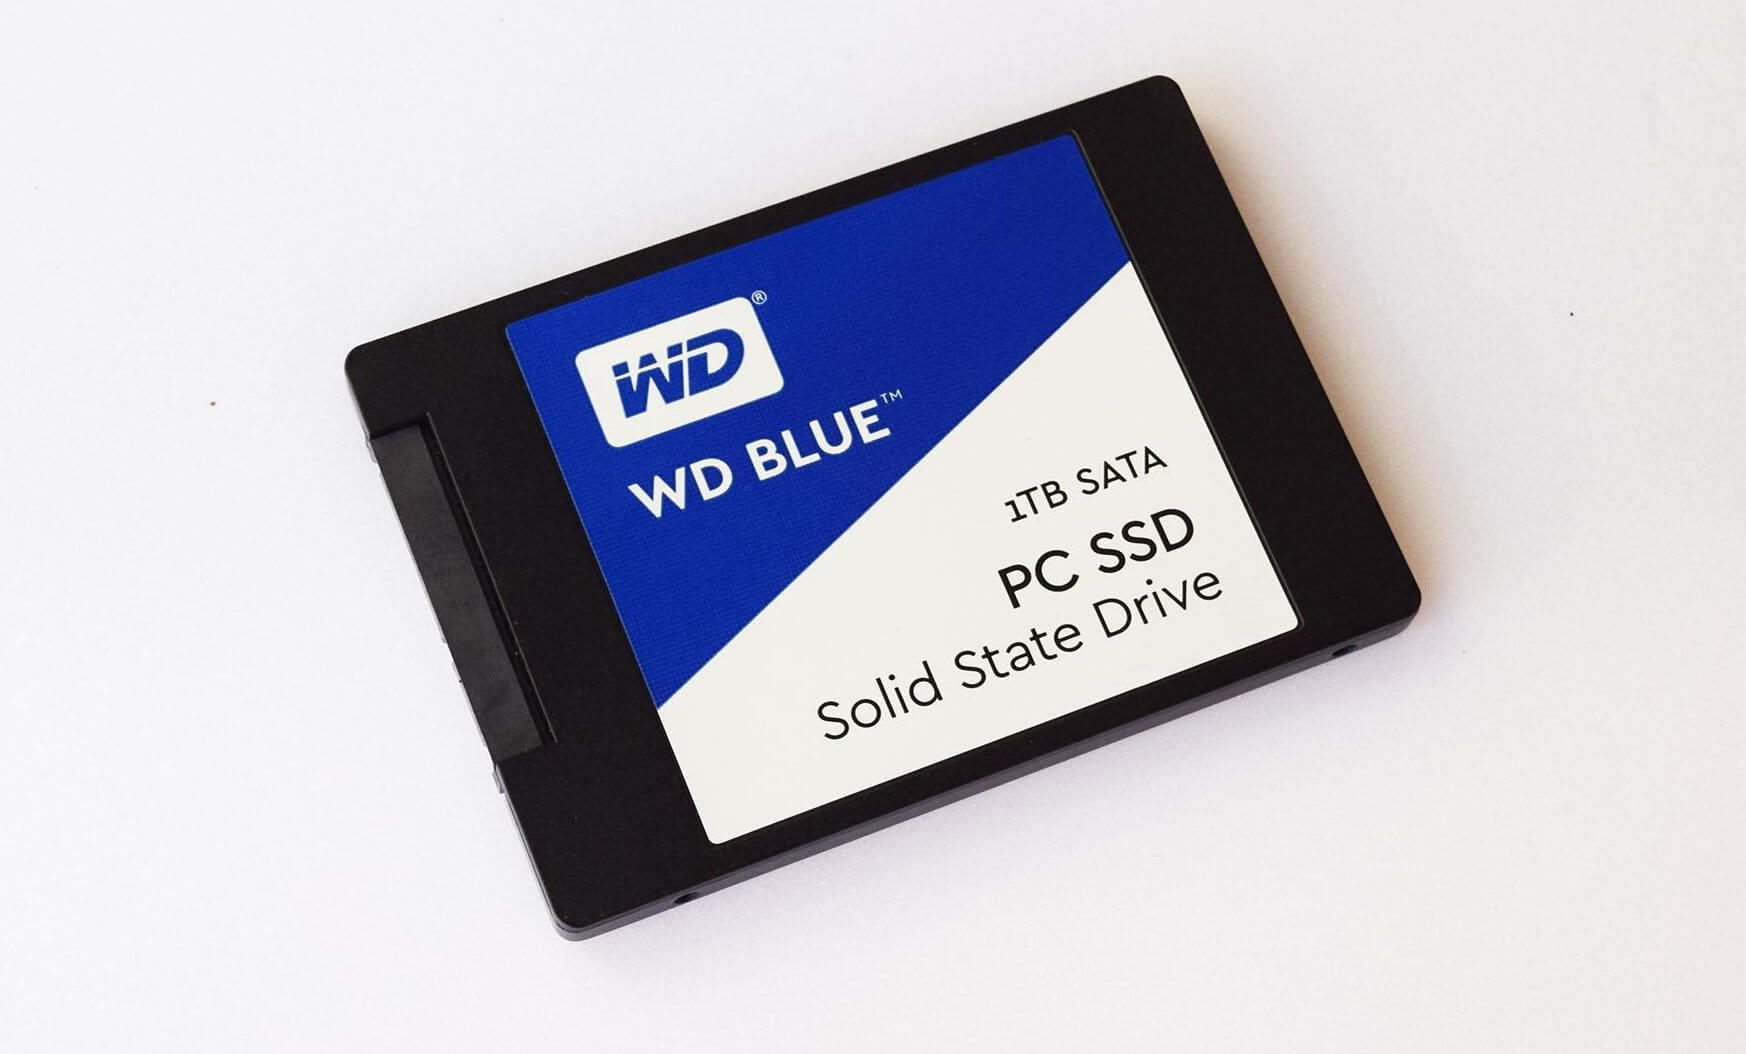 Ssd wd blue 1tb review